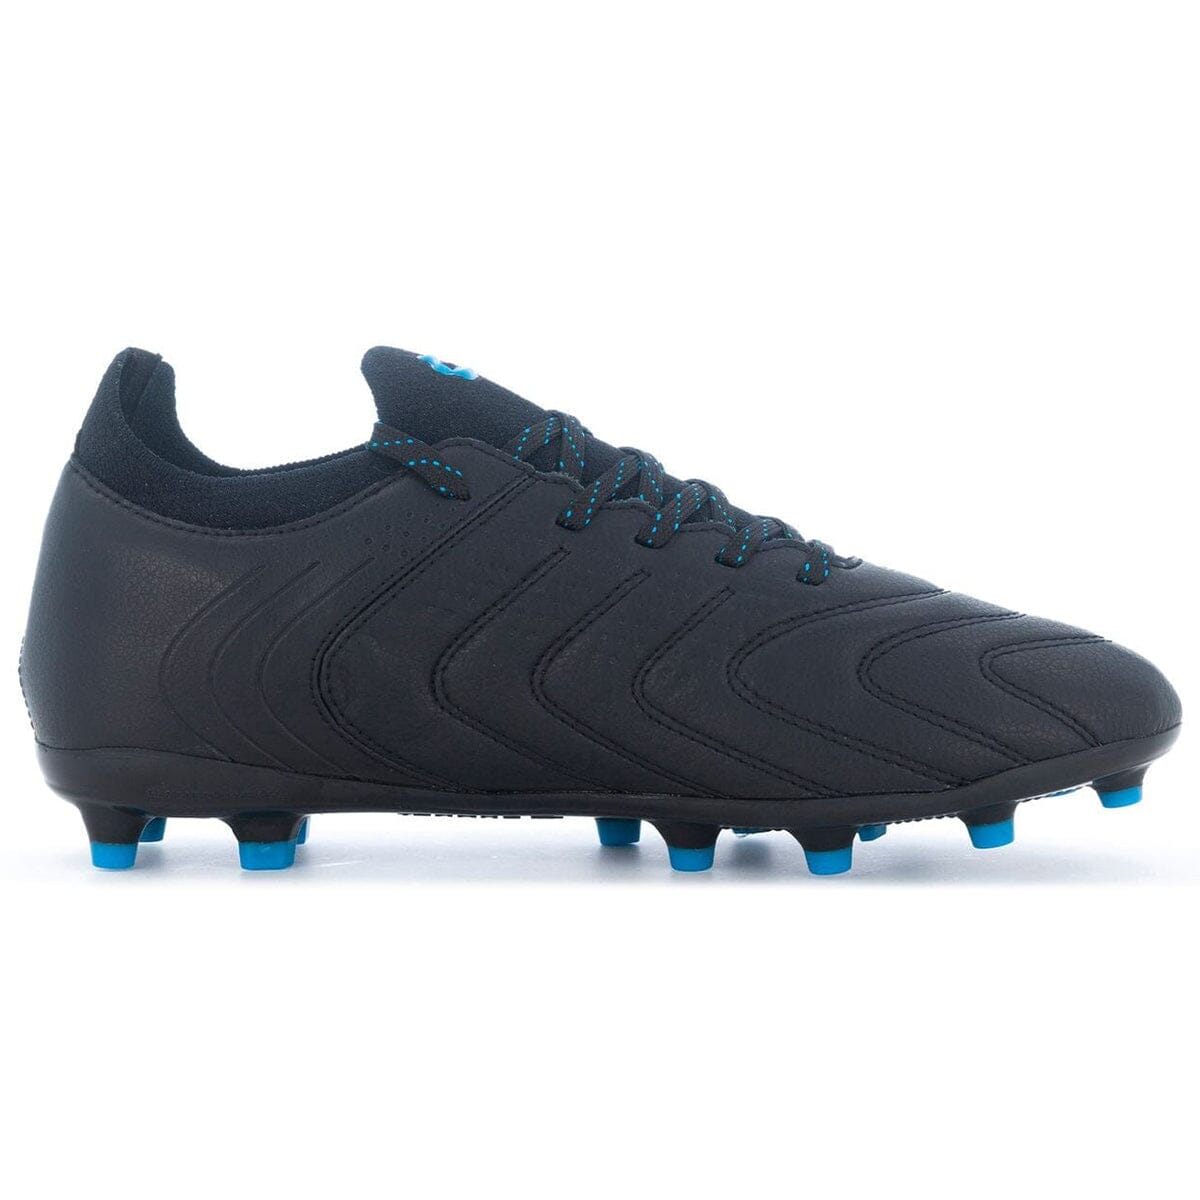 Charly Men's Encore RL FG Soccer Cleats | 1086361002 Cleats Charly 7.5 Black 